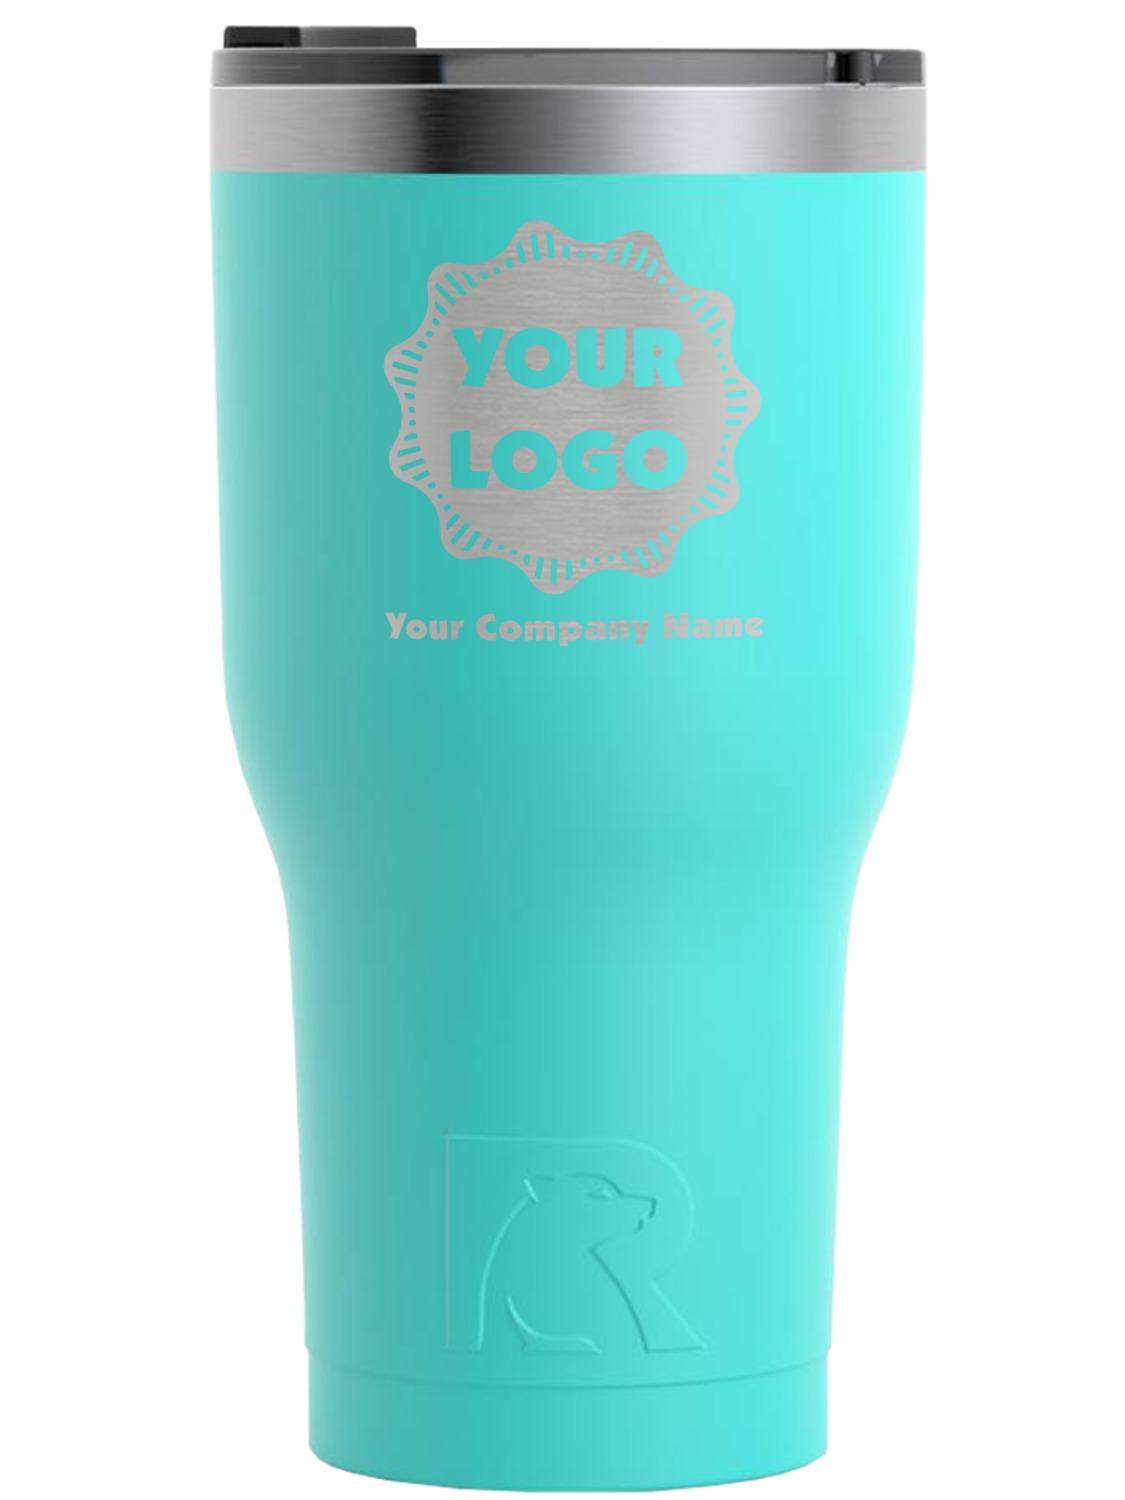 https://www.youcustomizeit.com/common/MAKE/638421/Logo-Company-Name-Teal-RTIC-Tumbler-Front.jpg?lm=1686953171